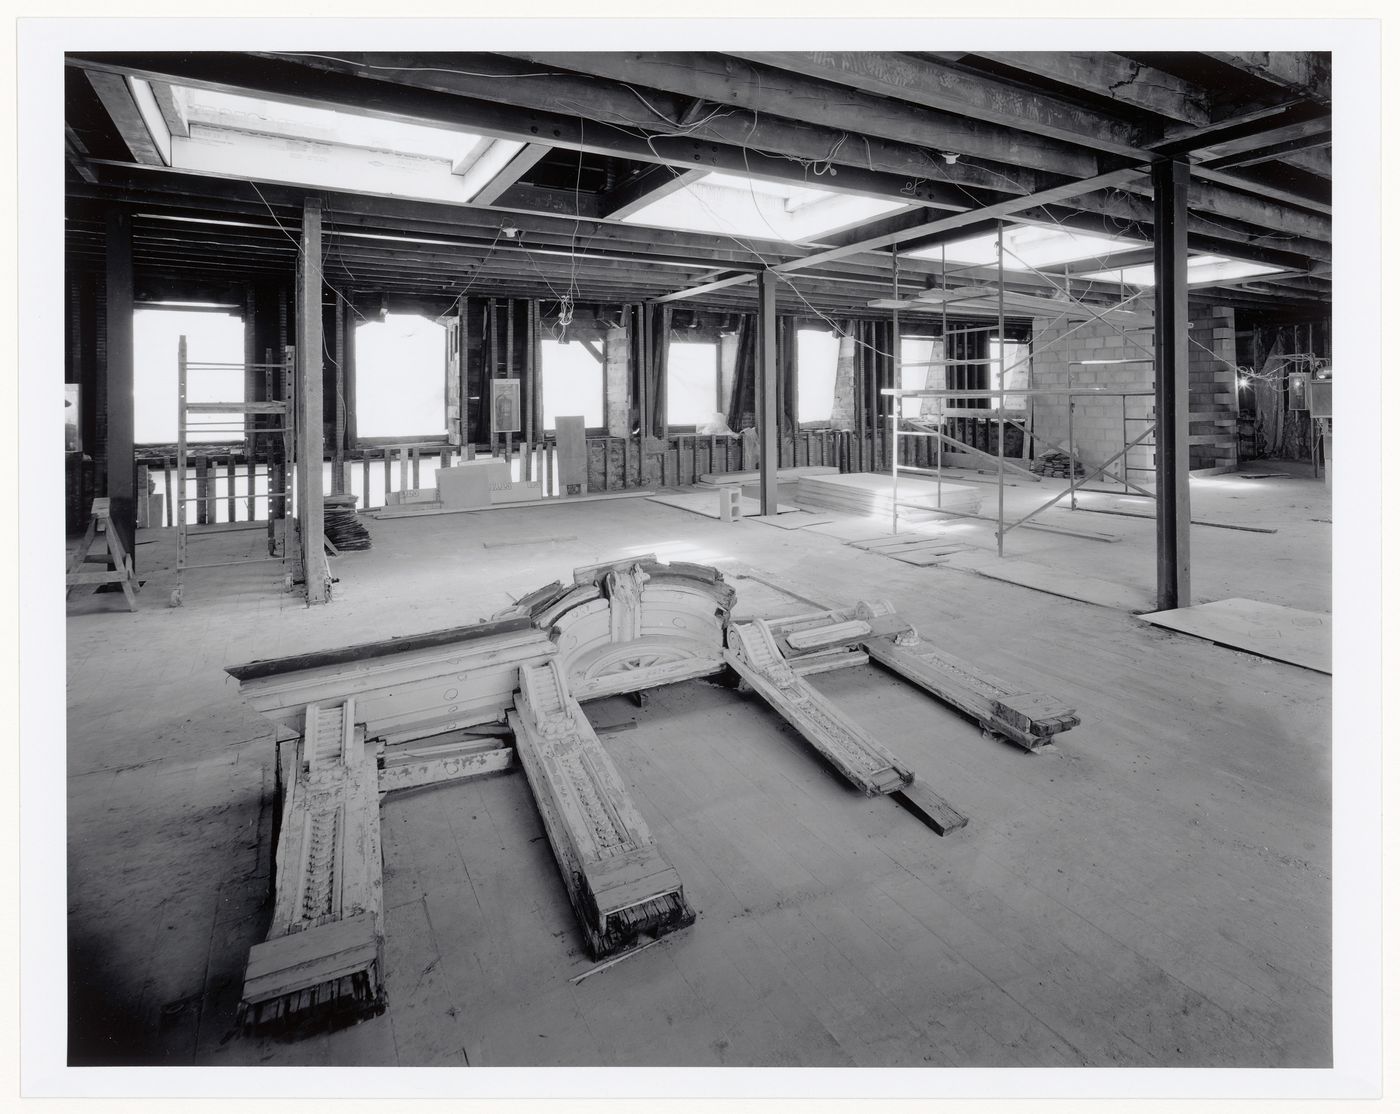 Interior view of level 6 showing the original frame for a Palladian window laid out on the floor for examination [?], Shaughnessy House under renovation, Montréal, Québec